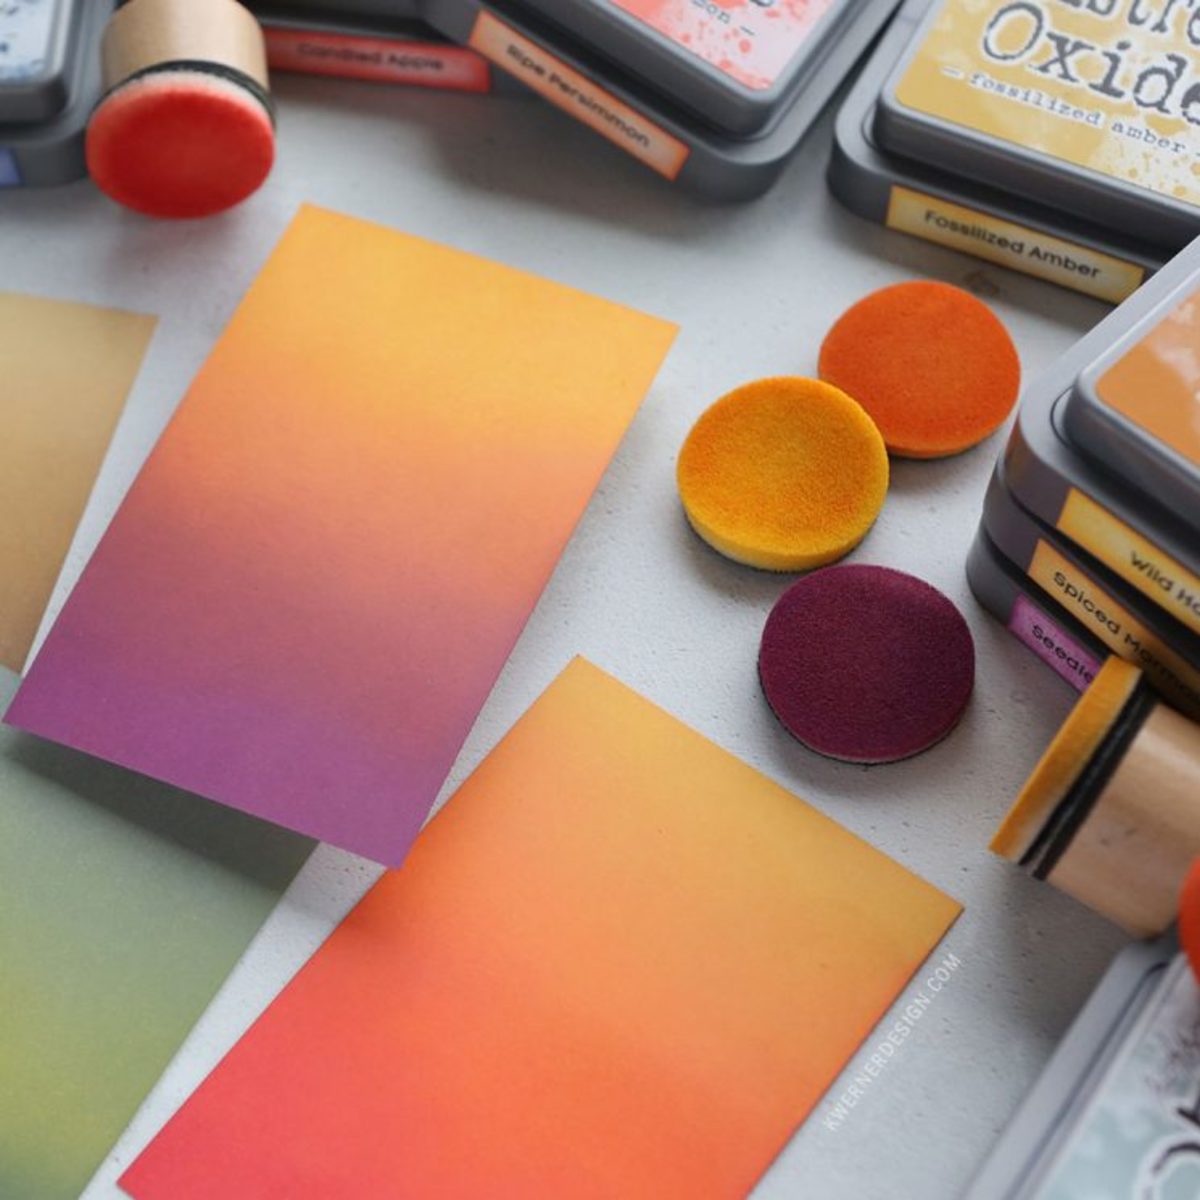 You can create seamless and lovely blending combinations with distress oxide inks